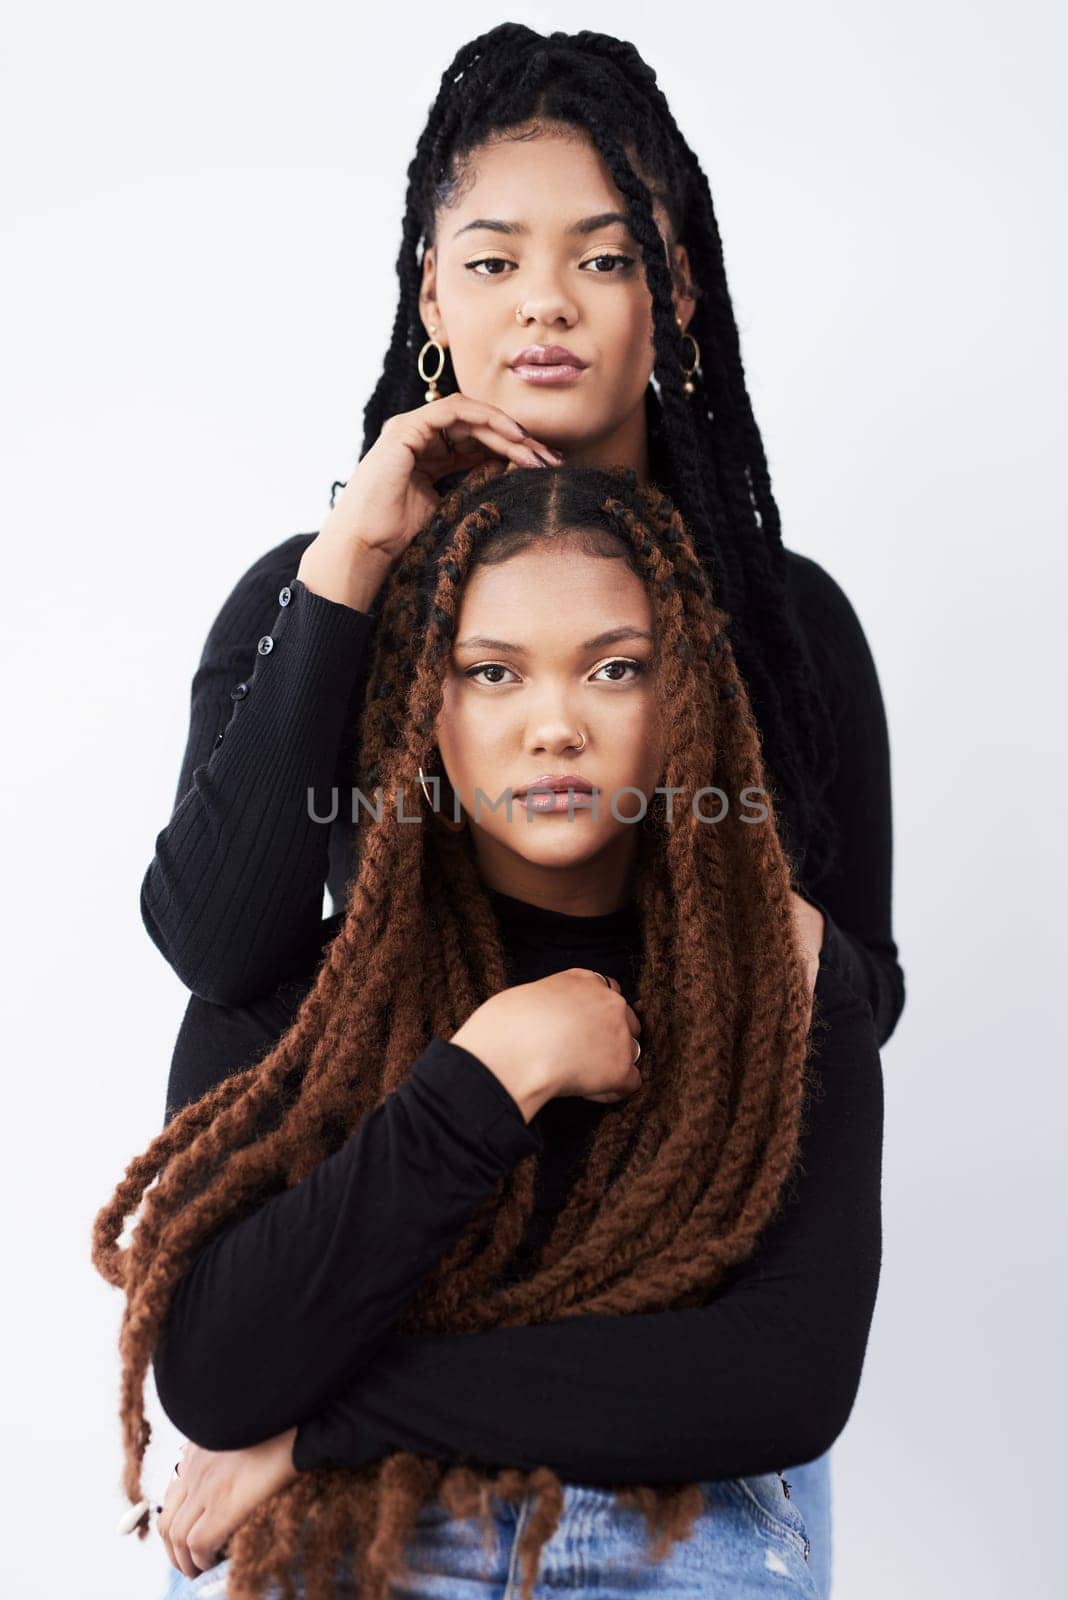 Lesbian couple, portrait and fashion in studio with pride for style inspiration, jeans and together. Serious, lgbt and black people for support with women, relationship and dreadlocks with clothes.